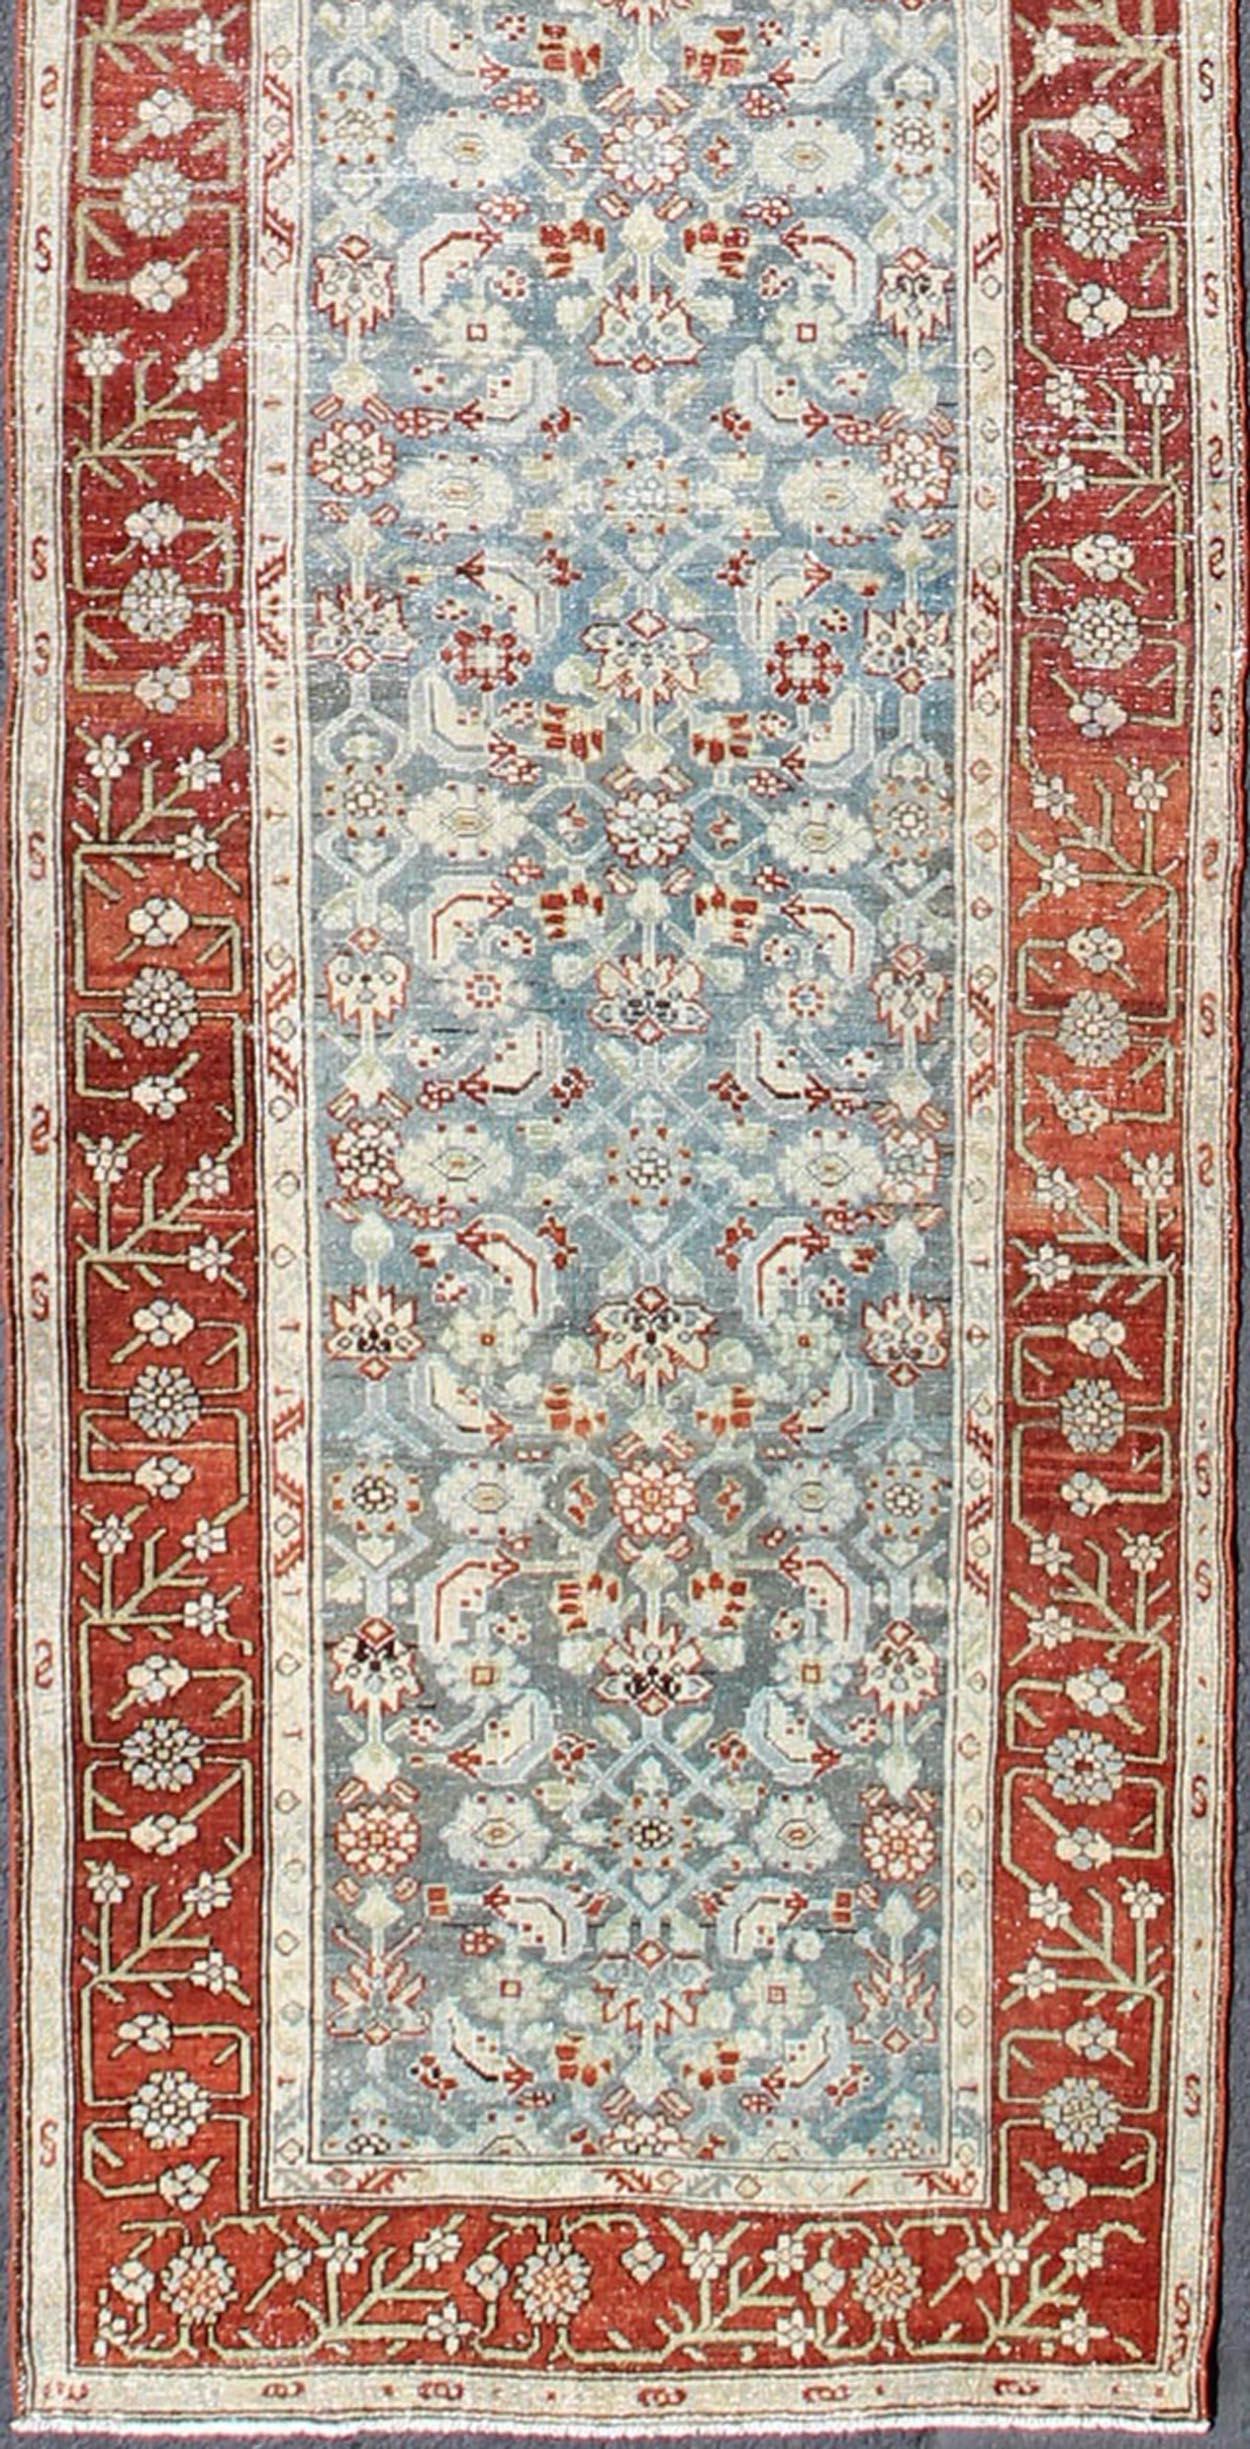 Antique long runner Persian Malayer with all-over intricate floral design in red and blue tones, Keivan Woven Arts/ rug ema-7523, country of origin / type: Iran / Malayer, circa 1910.

This antique Persian Malayer runner, circa early 20th century,